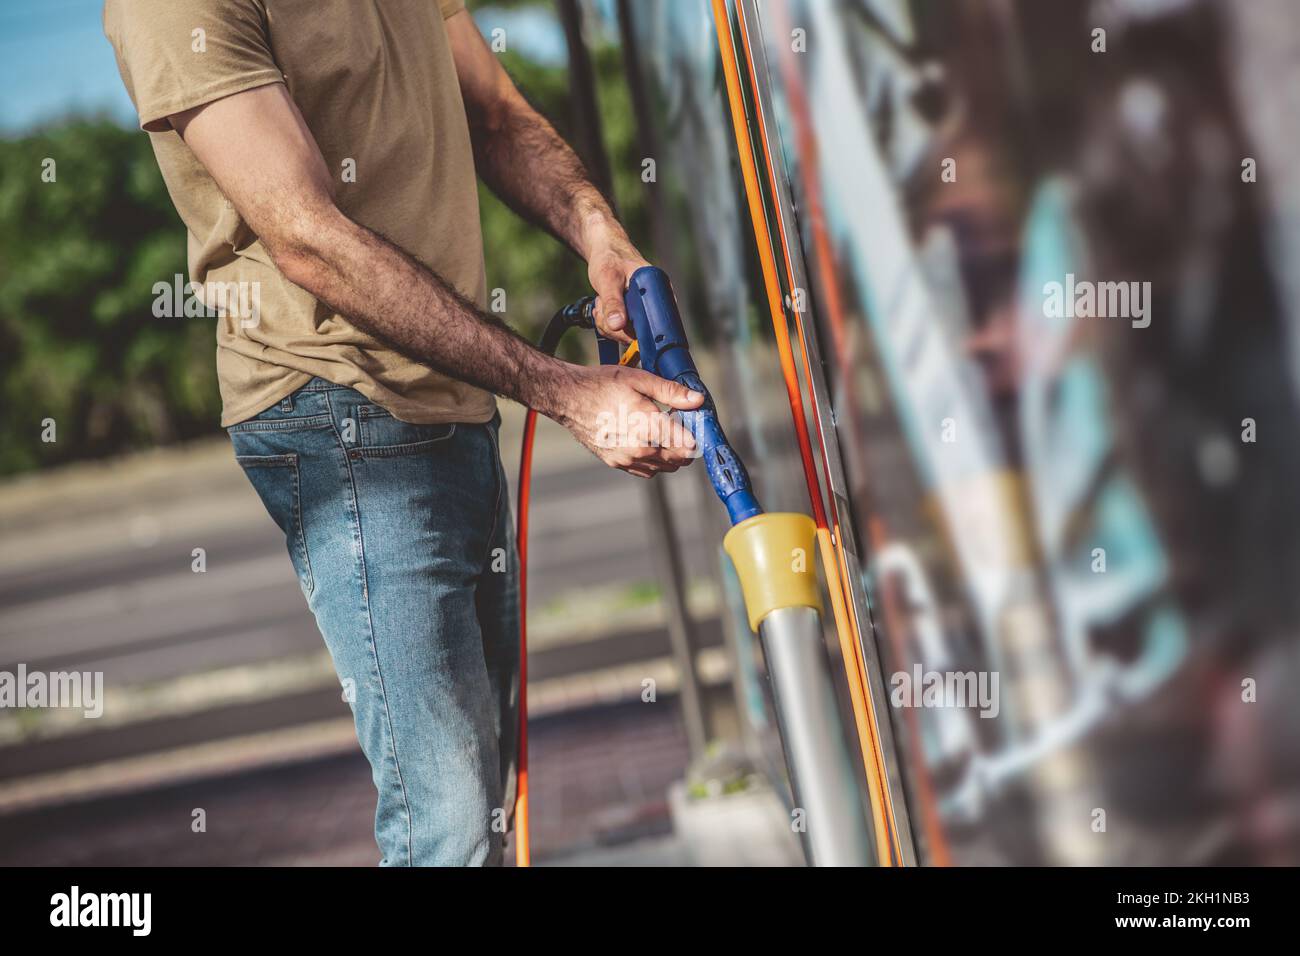 Experienced service station worker preparing for a car washing procedure Stock Photo